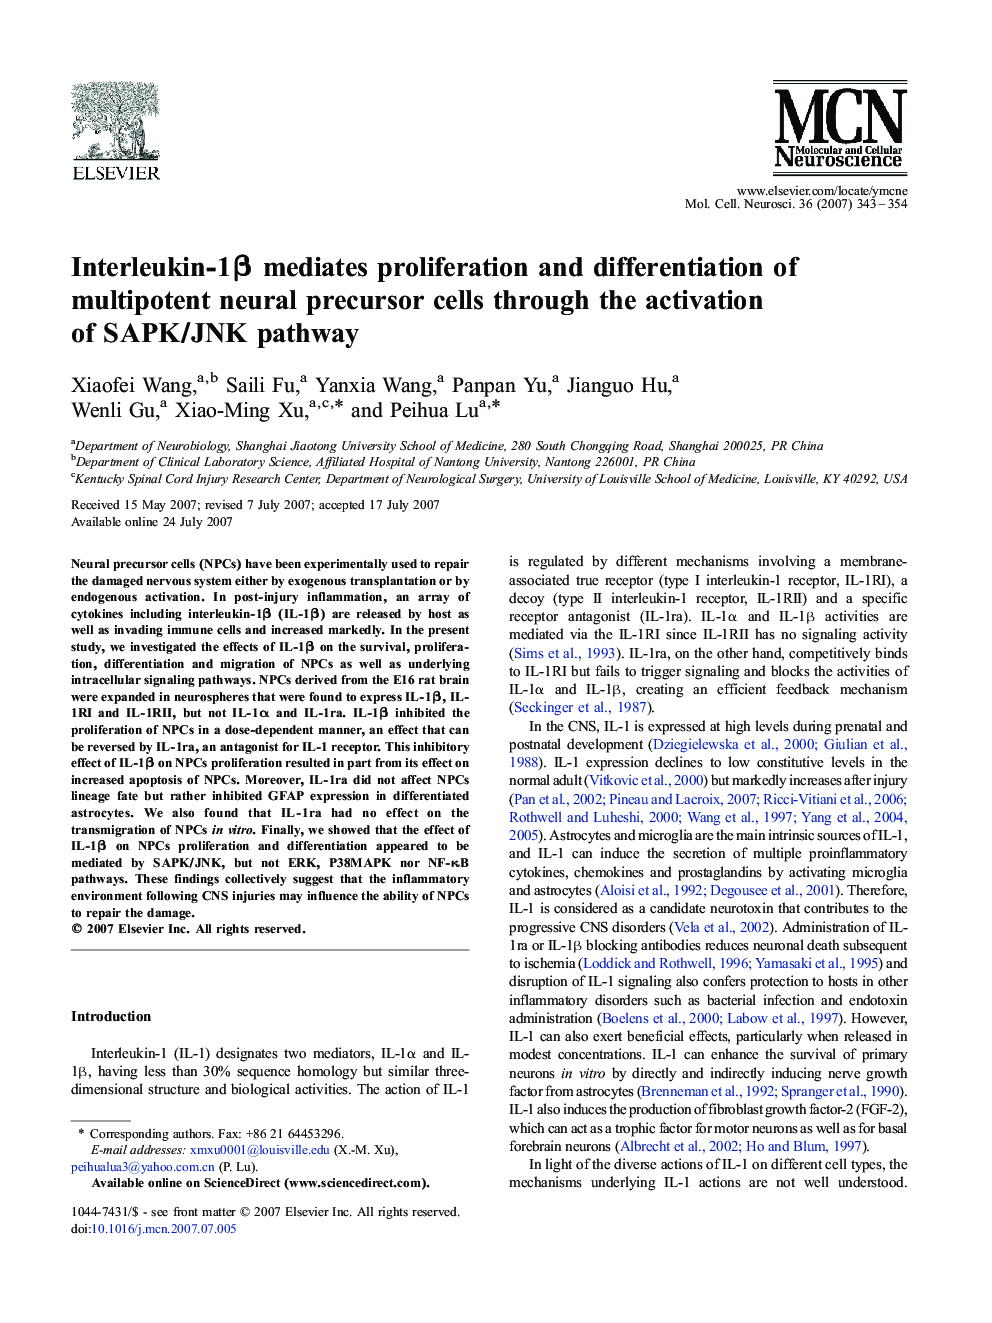 Interleukin-1β mediates proliferation and differentiation of multipotent neural precursor cells through the activation of SAPK/JNK pathway